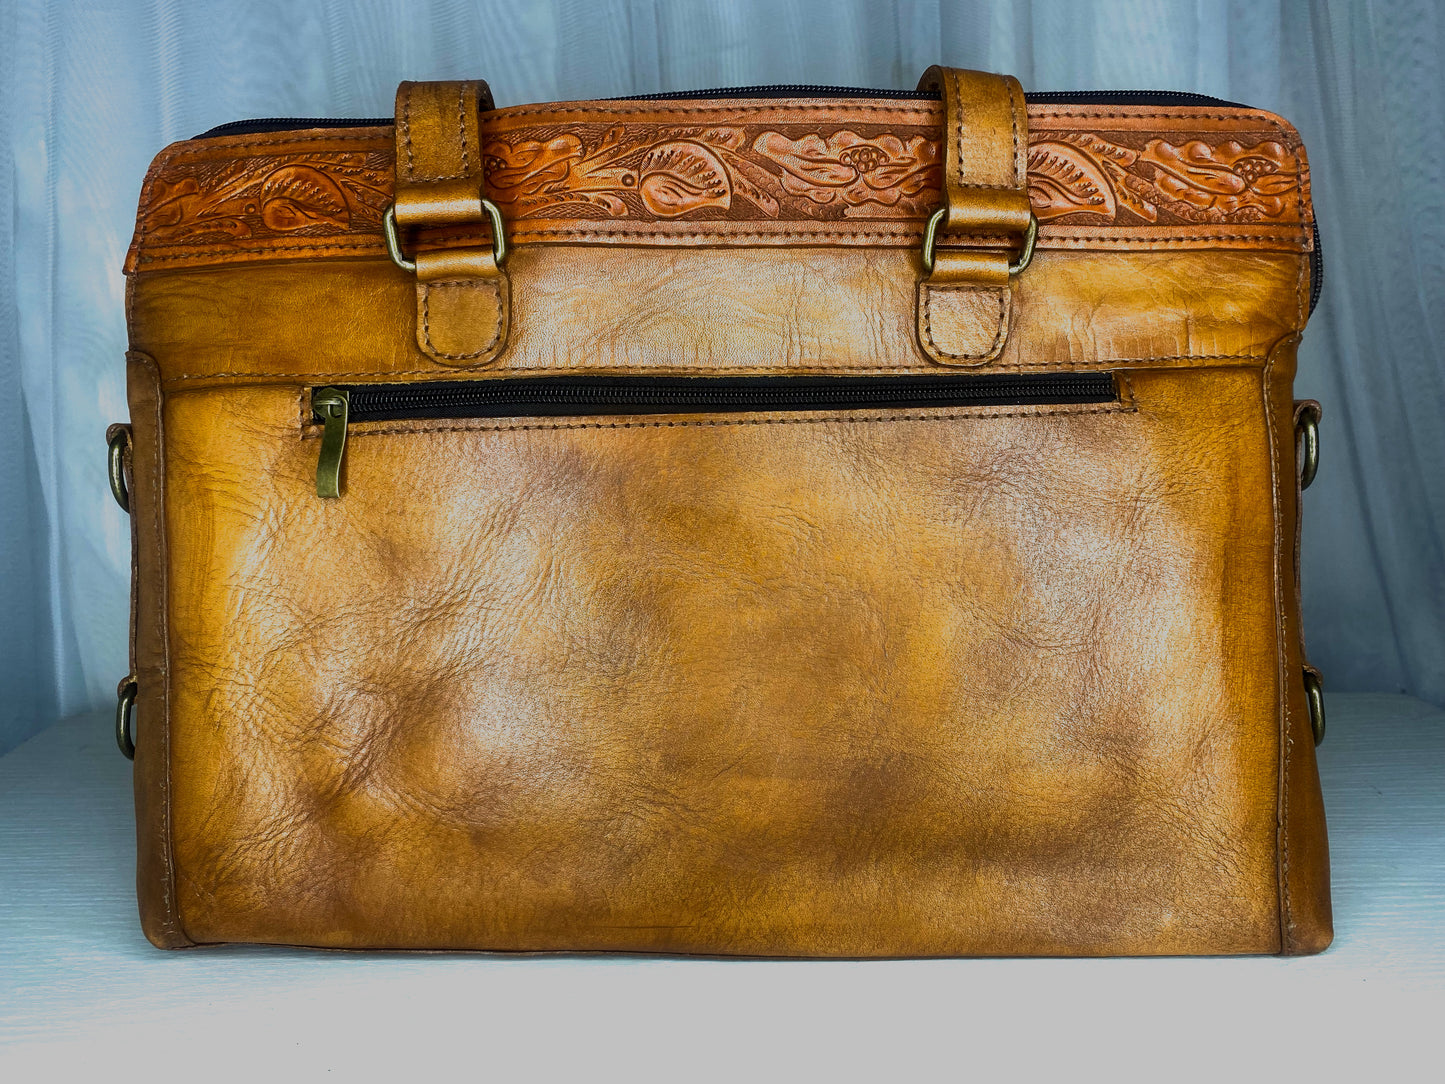 Medium-sized full leather messenger bag with one inch of traditional mexican Etching on the upper portion of the bag. Fully lined with suede.  On camel color